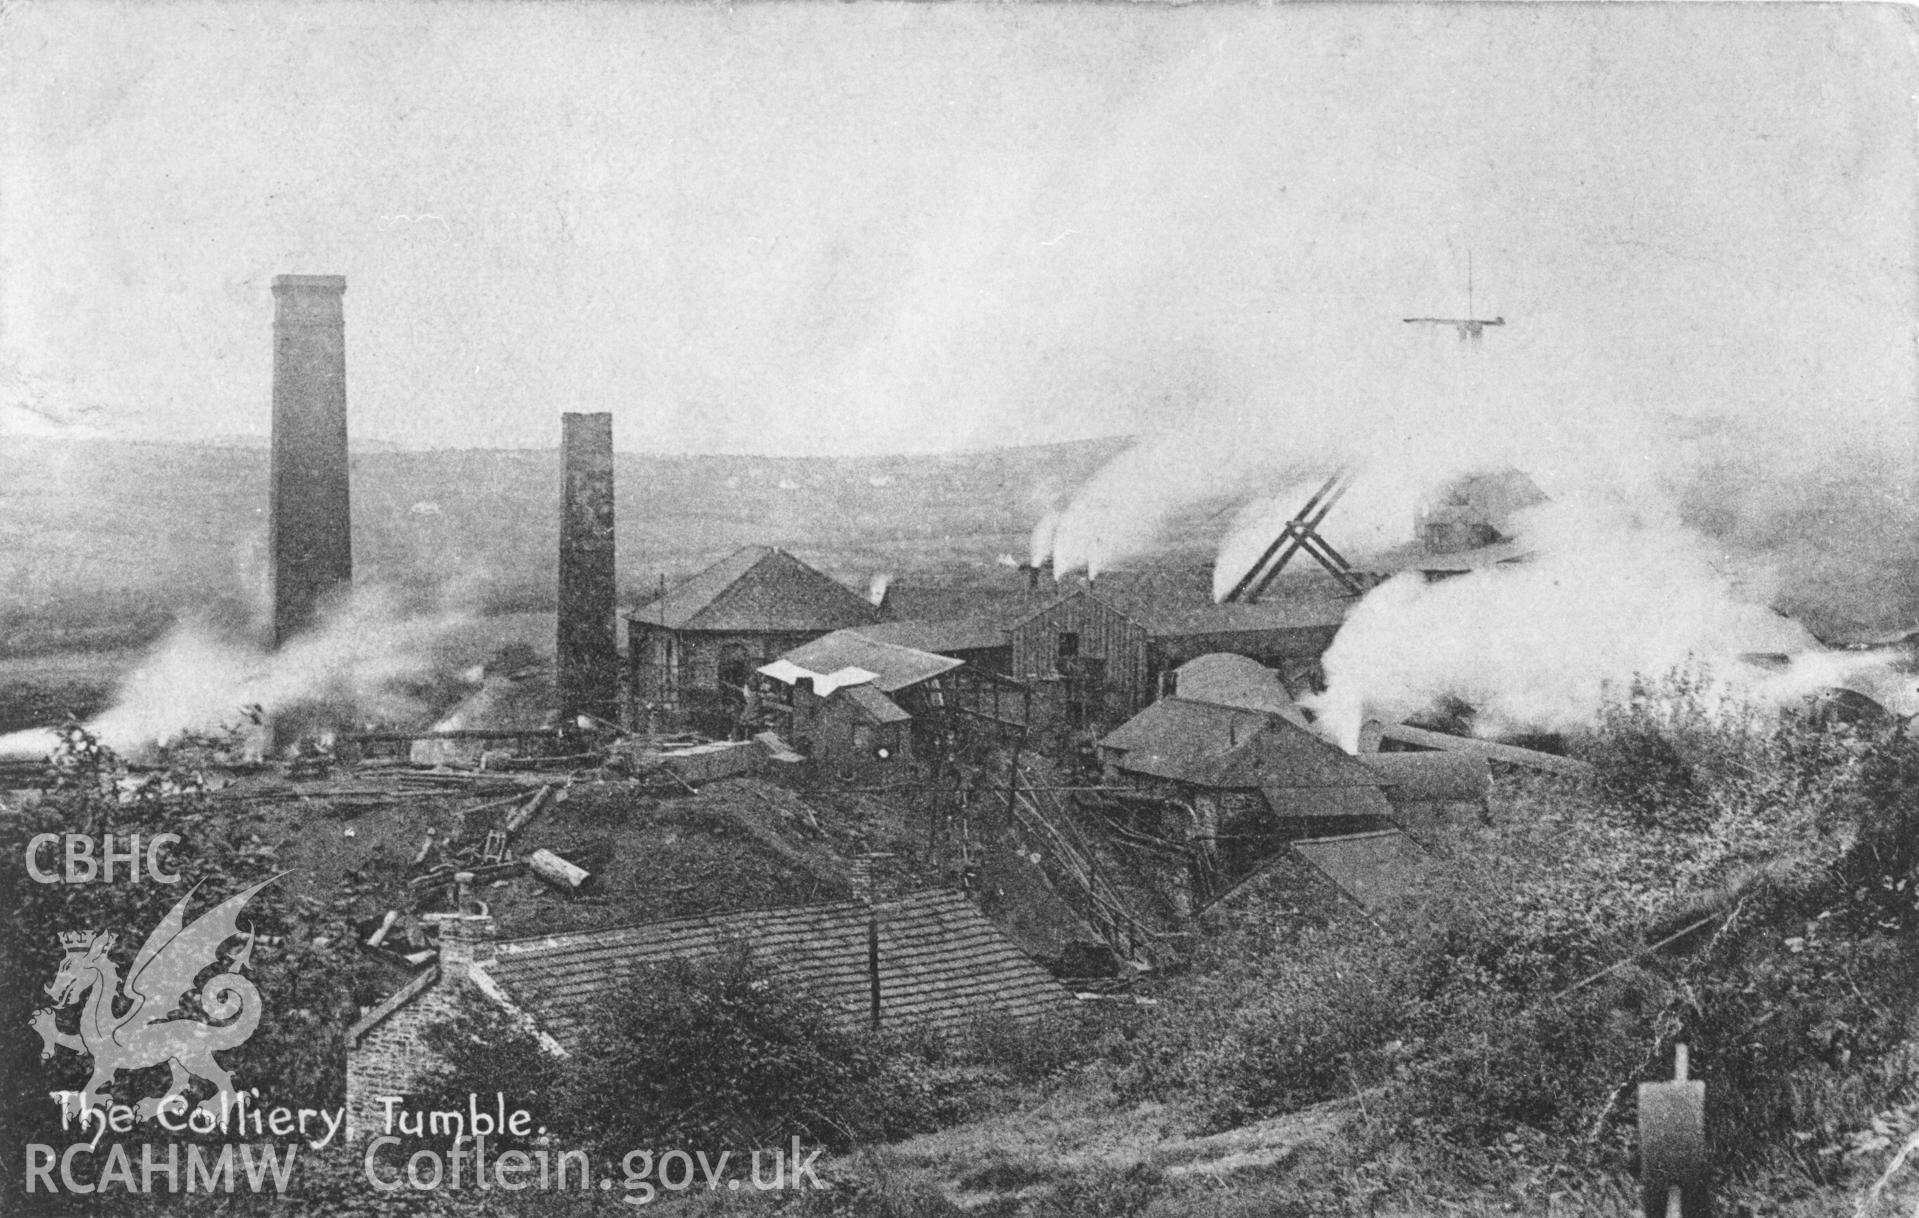 Digital copy of a view of Tumble Colliery, copied from an image in the Thomas Lloyd Carmarthenshire Album